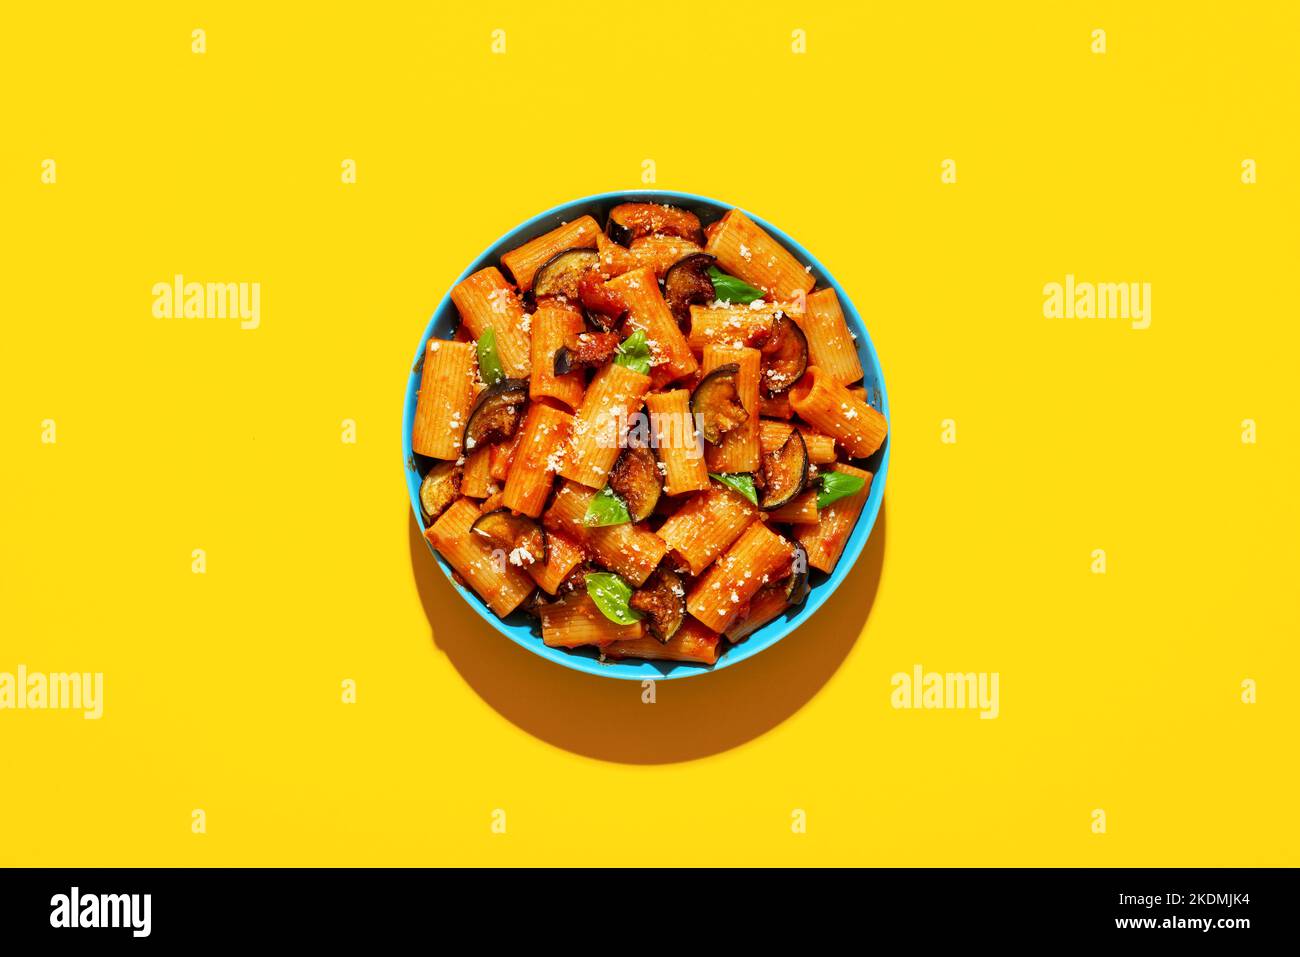 Italian dish, pasta with deep-fried eggplant, top view on a yellow-colored table. Pasta Alla Norma plate minimalist on a colorful background in bright Stock Photo